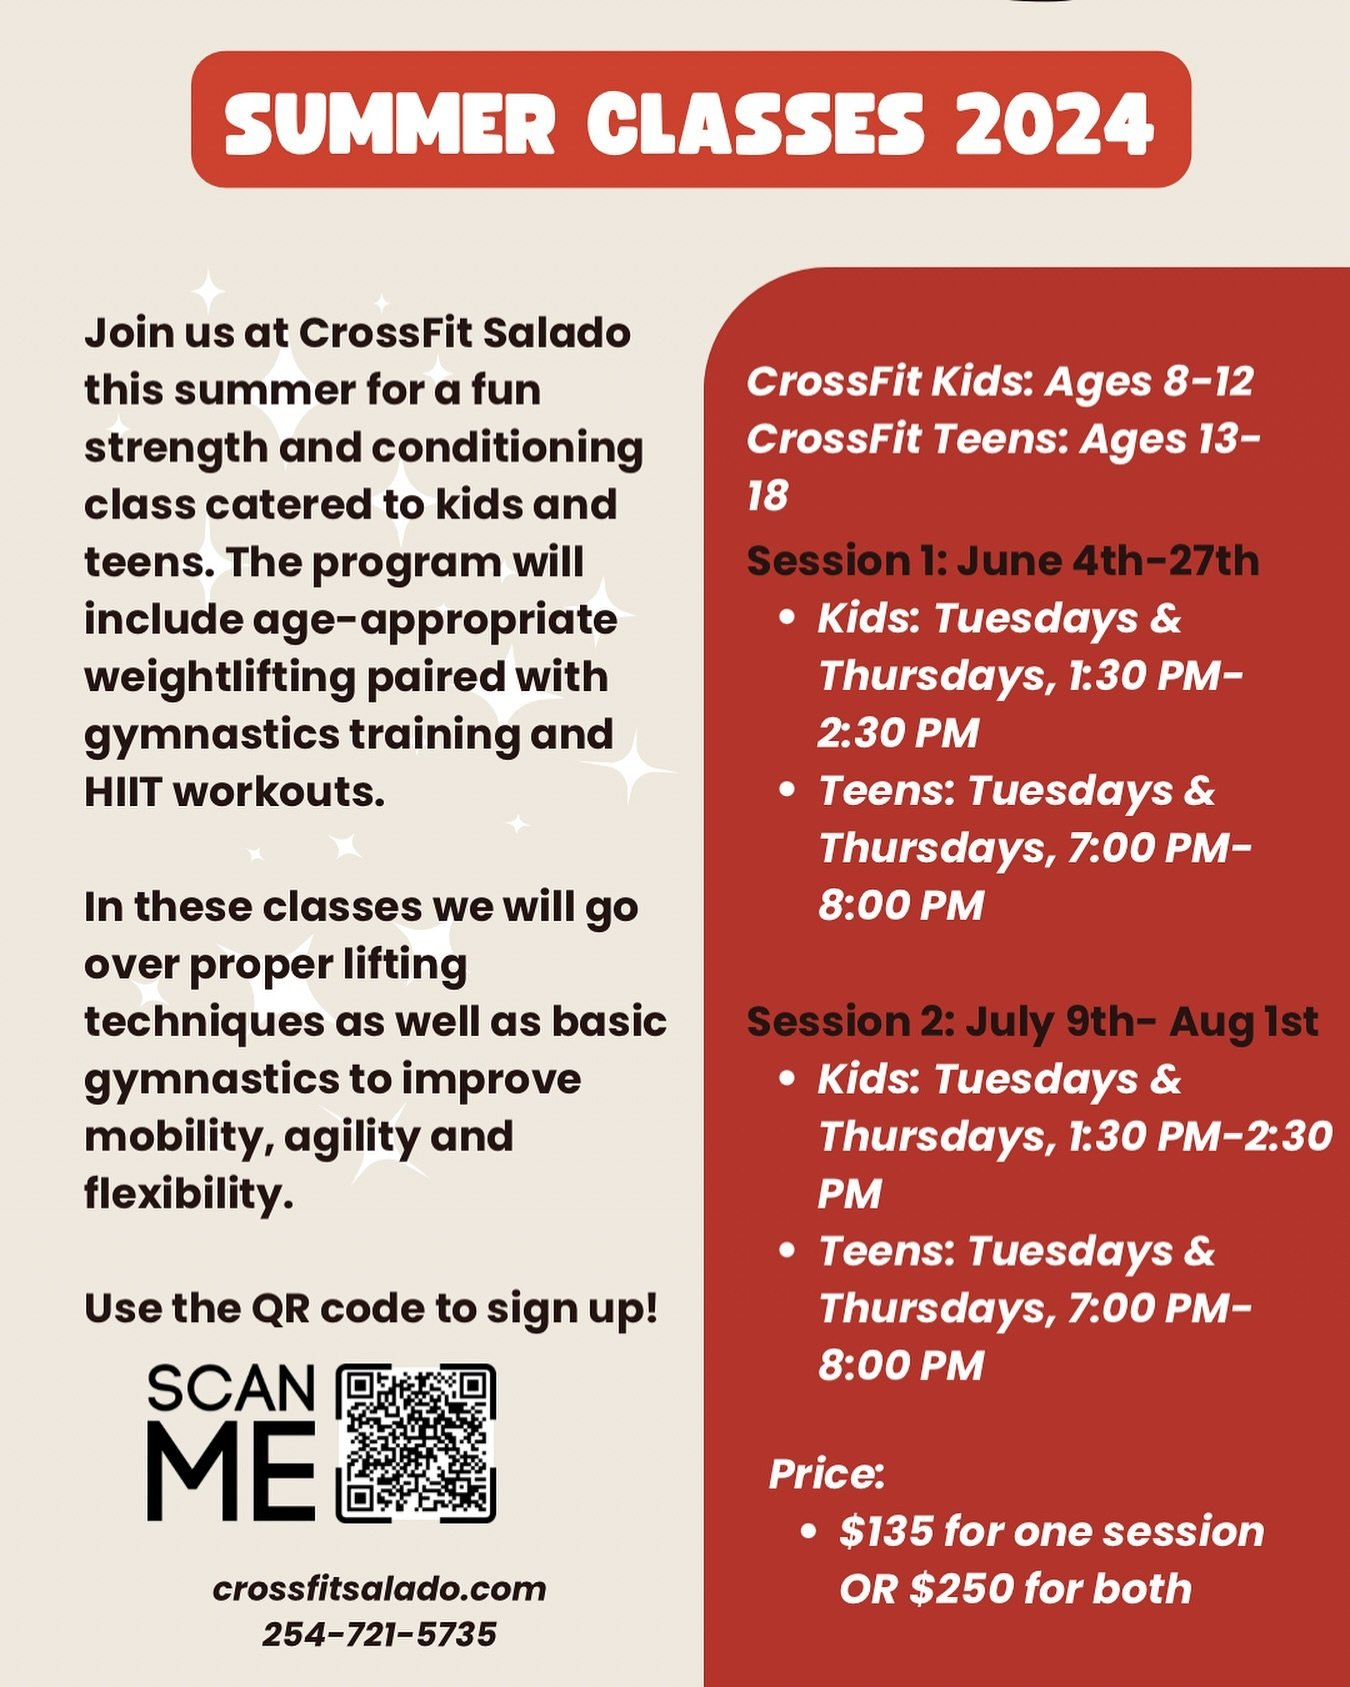 CrossFit Kids and Teens summer classes are here! Now is the time to plan! ⁣
⁣
Want to keep your kiddos fit and ready for sports the next year? Sign them up for our CrossFit classes. These classes will be catered to age appropriate lifting and workout